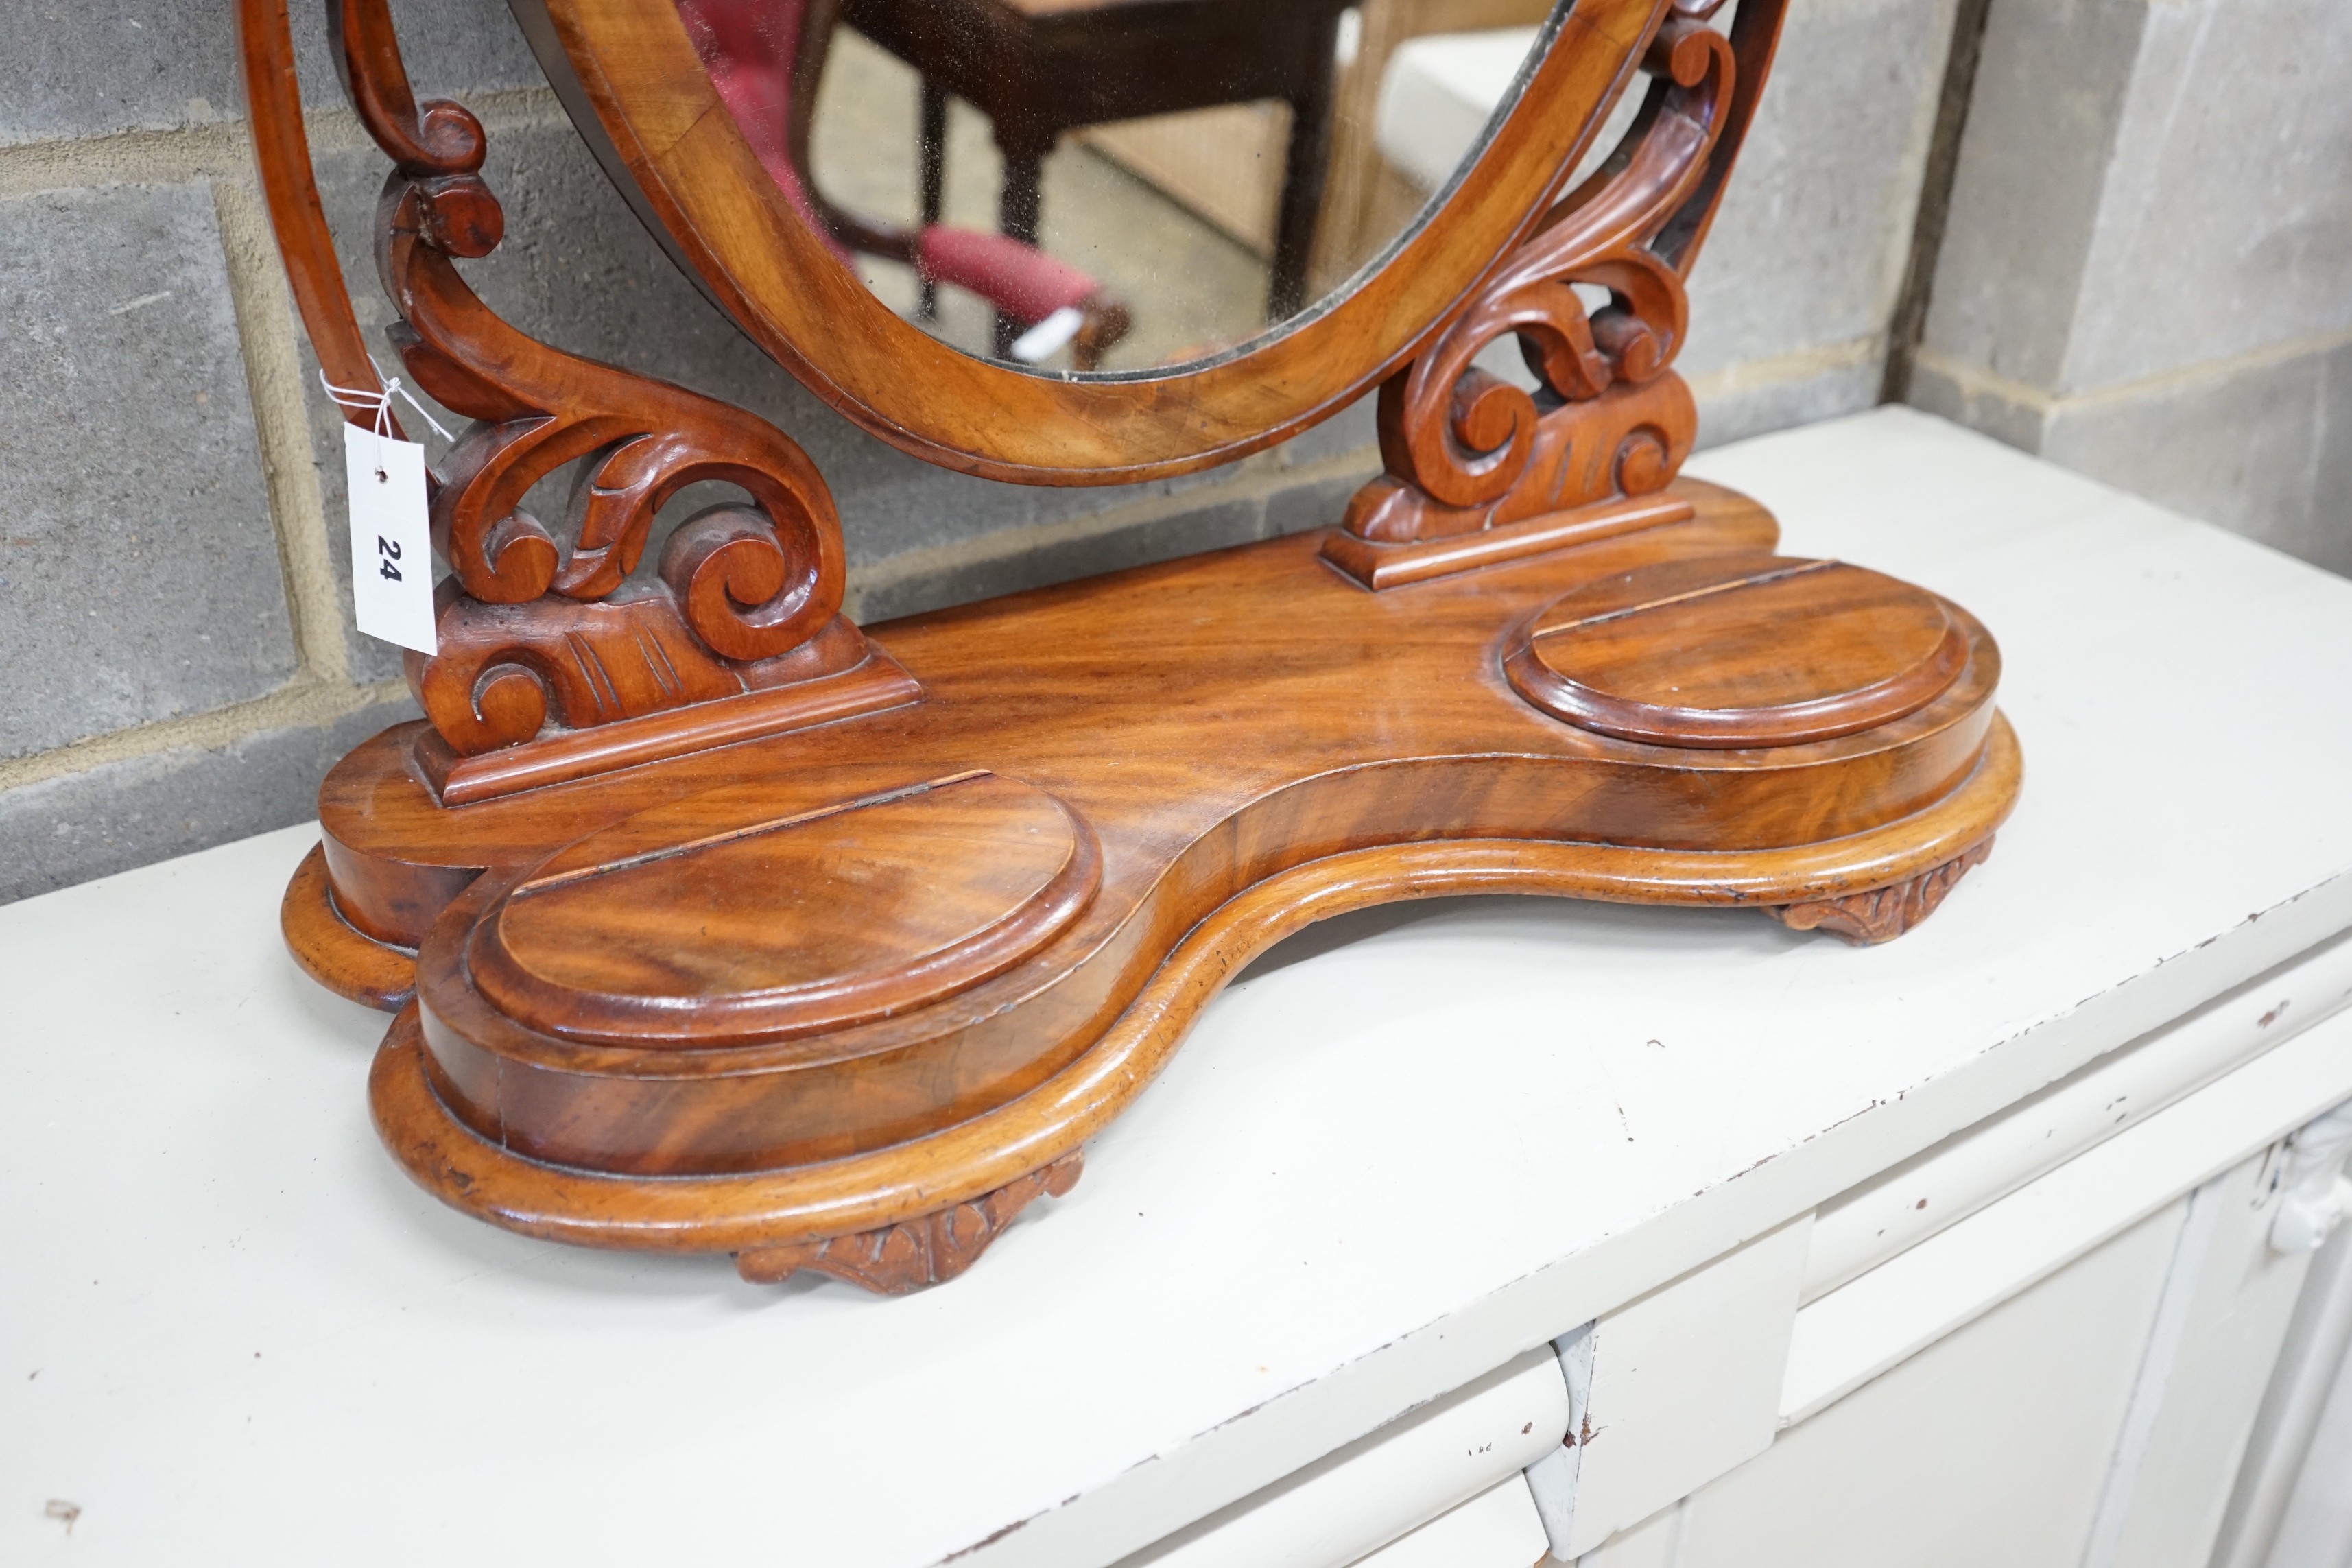 A large Victorian mahogany toilet mirror, width 66cm, height 80cm